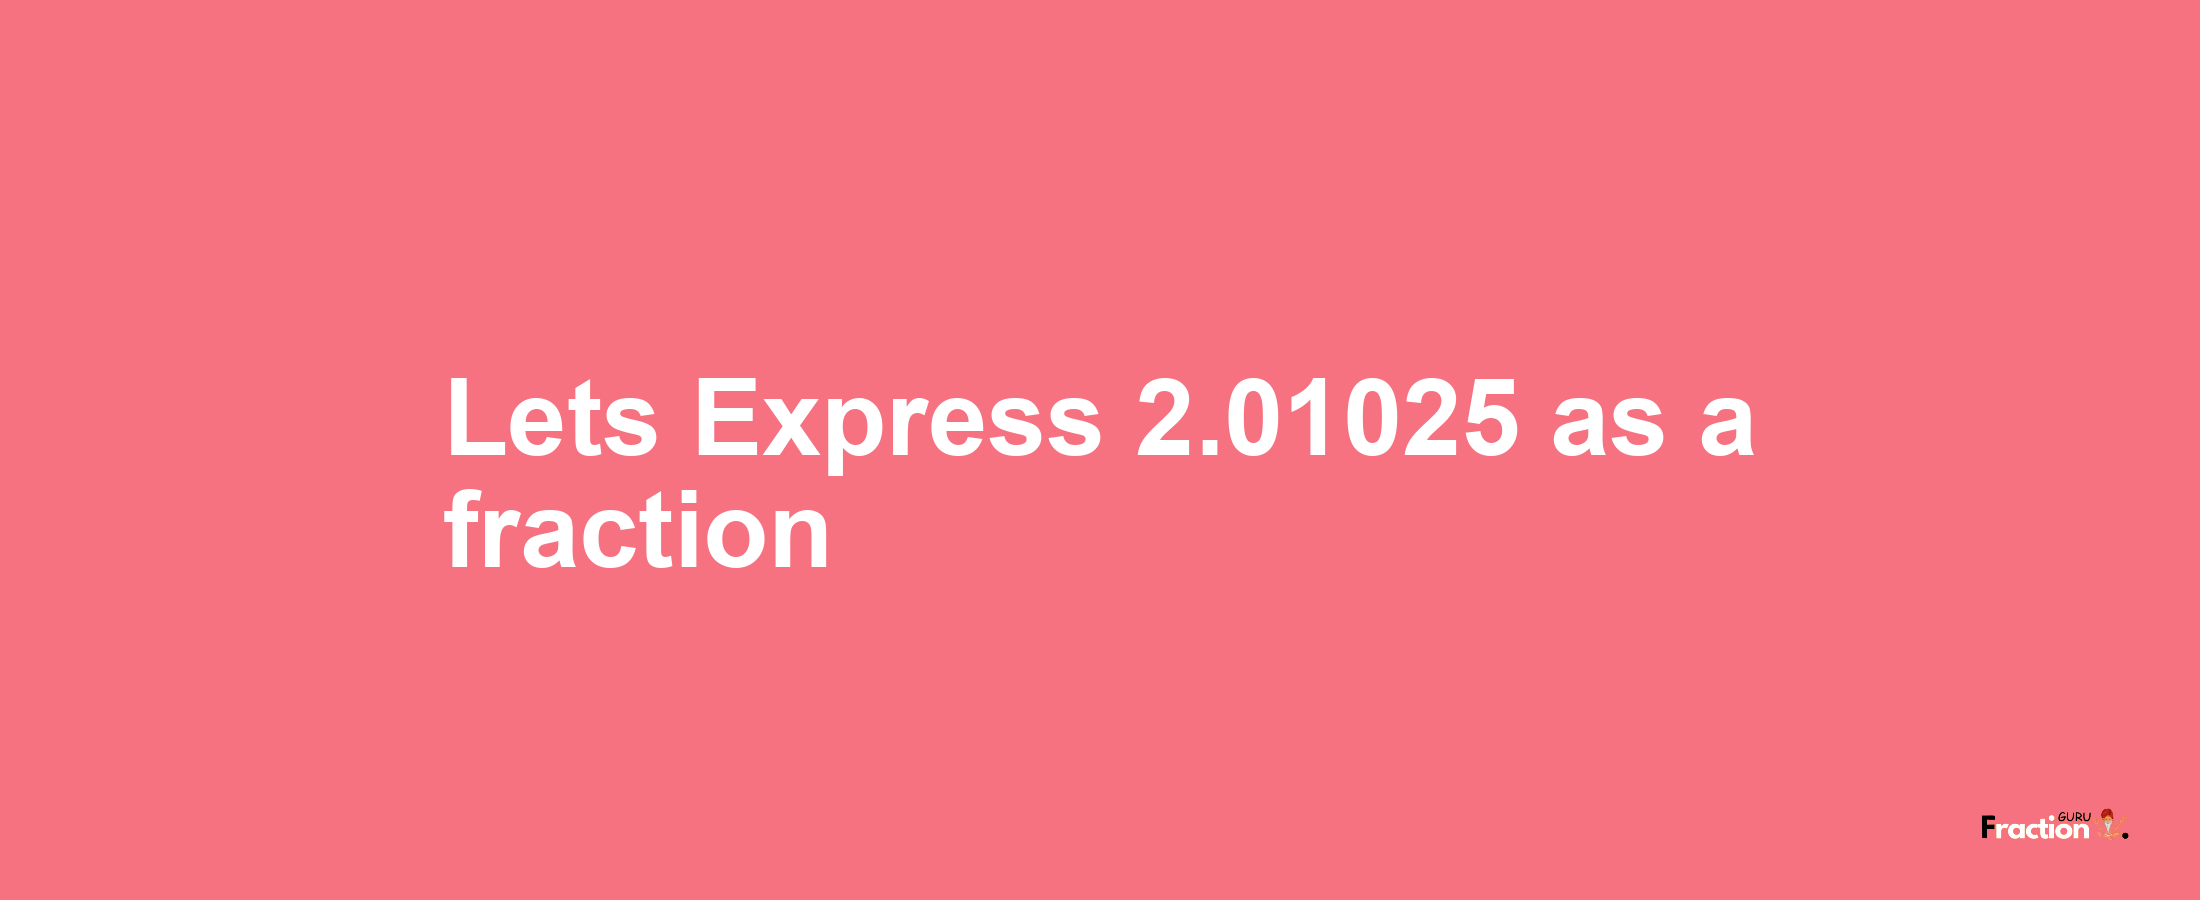 Lets Express 2.01025 as afraction